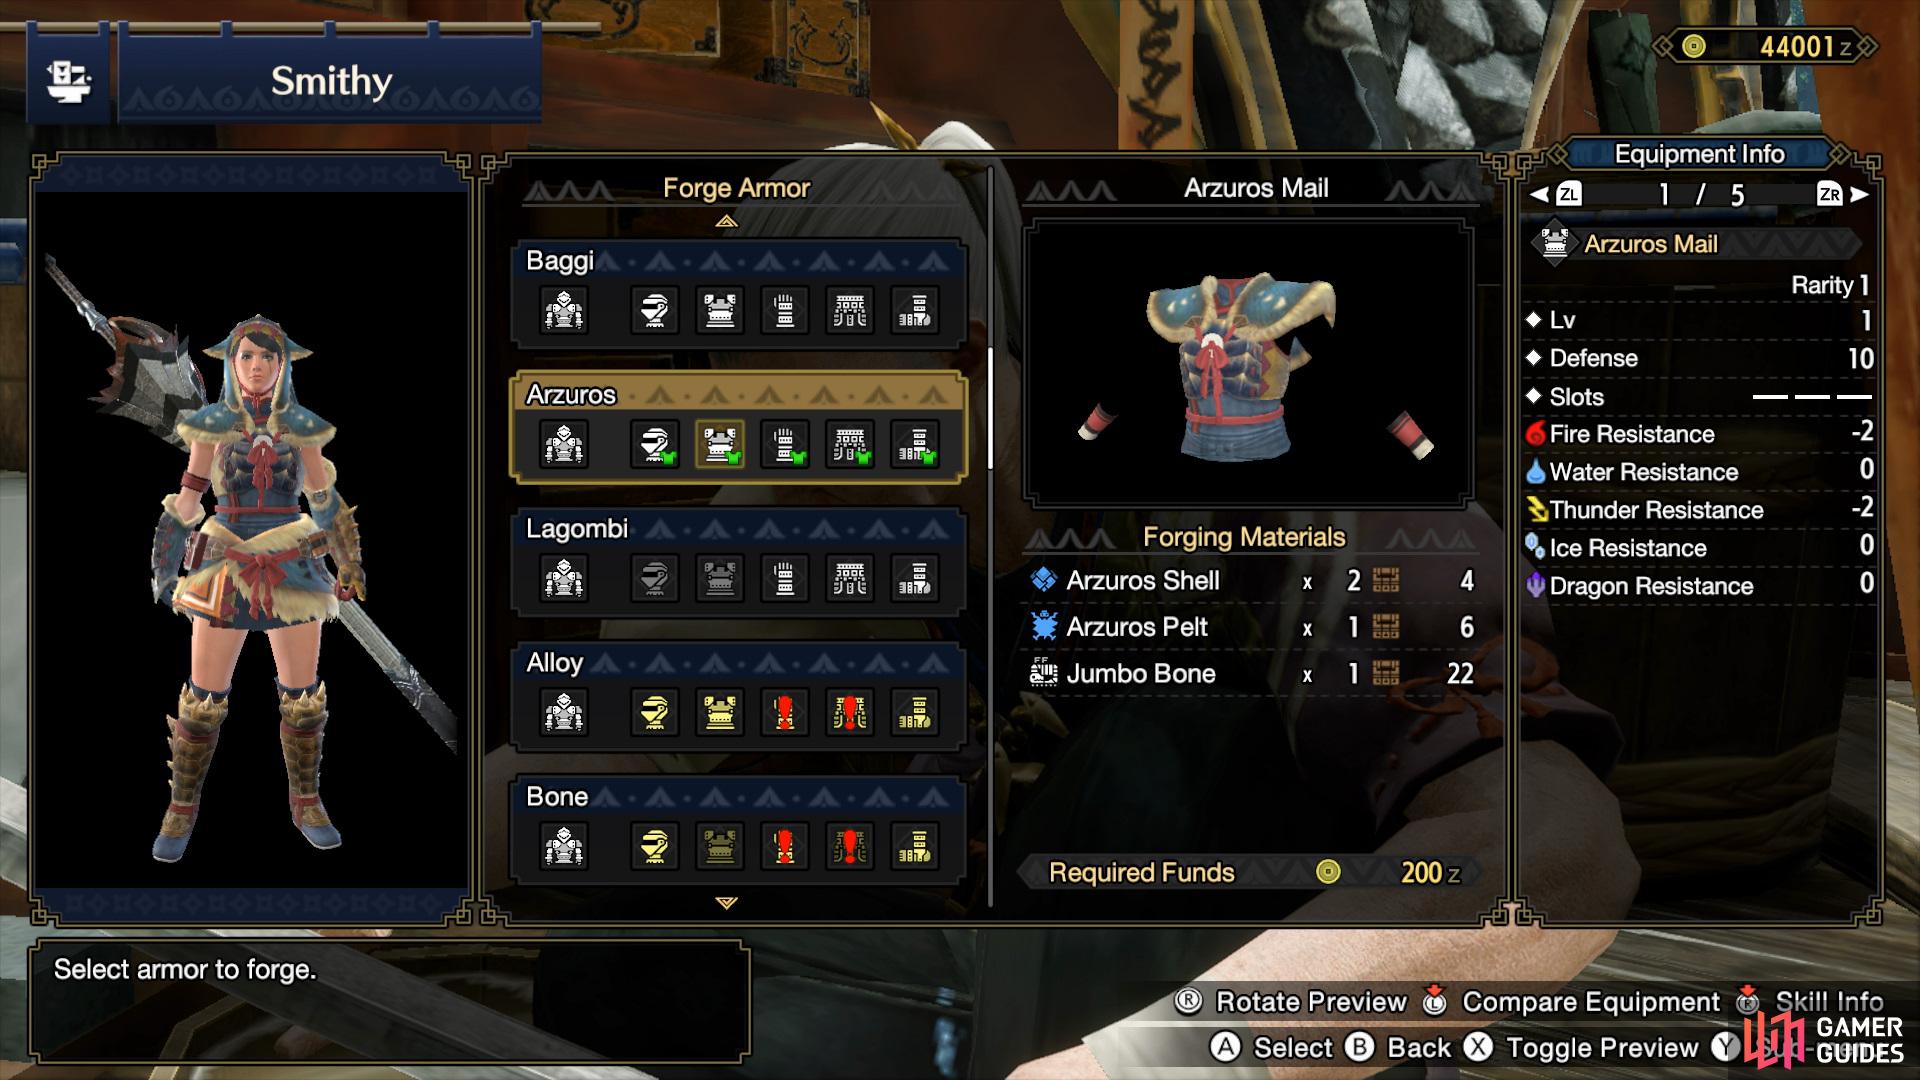 The Arzuros Armor can be crafted via the Blacksmith in Kumara Village.